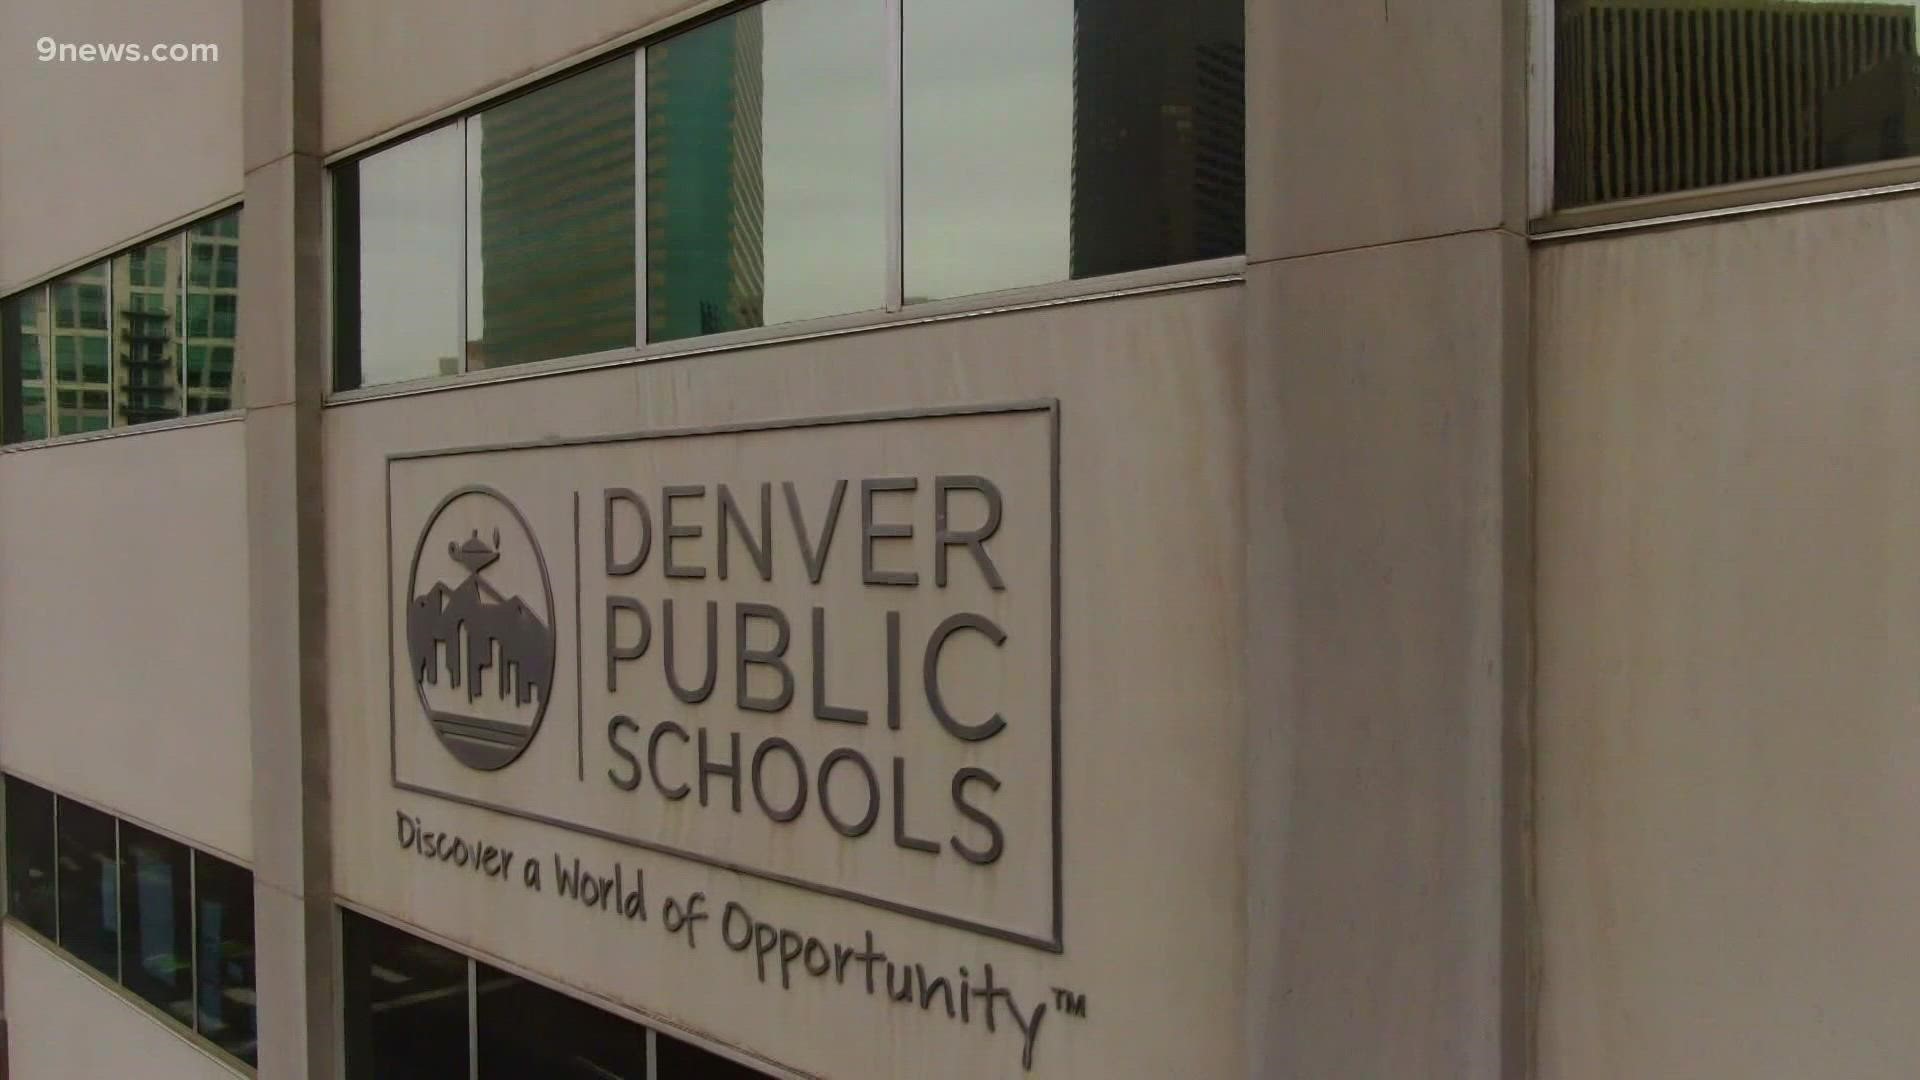 The move comes after the Denver Department of Public Health and Environment said they would lift their mask order for schools and child care facilities.